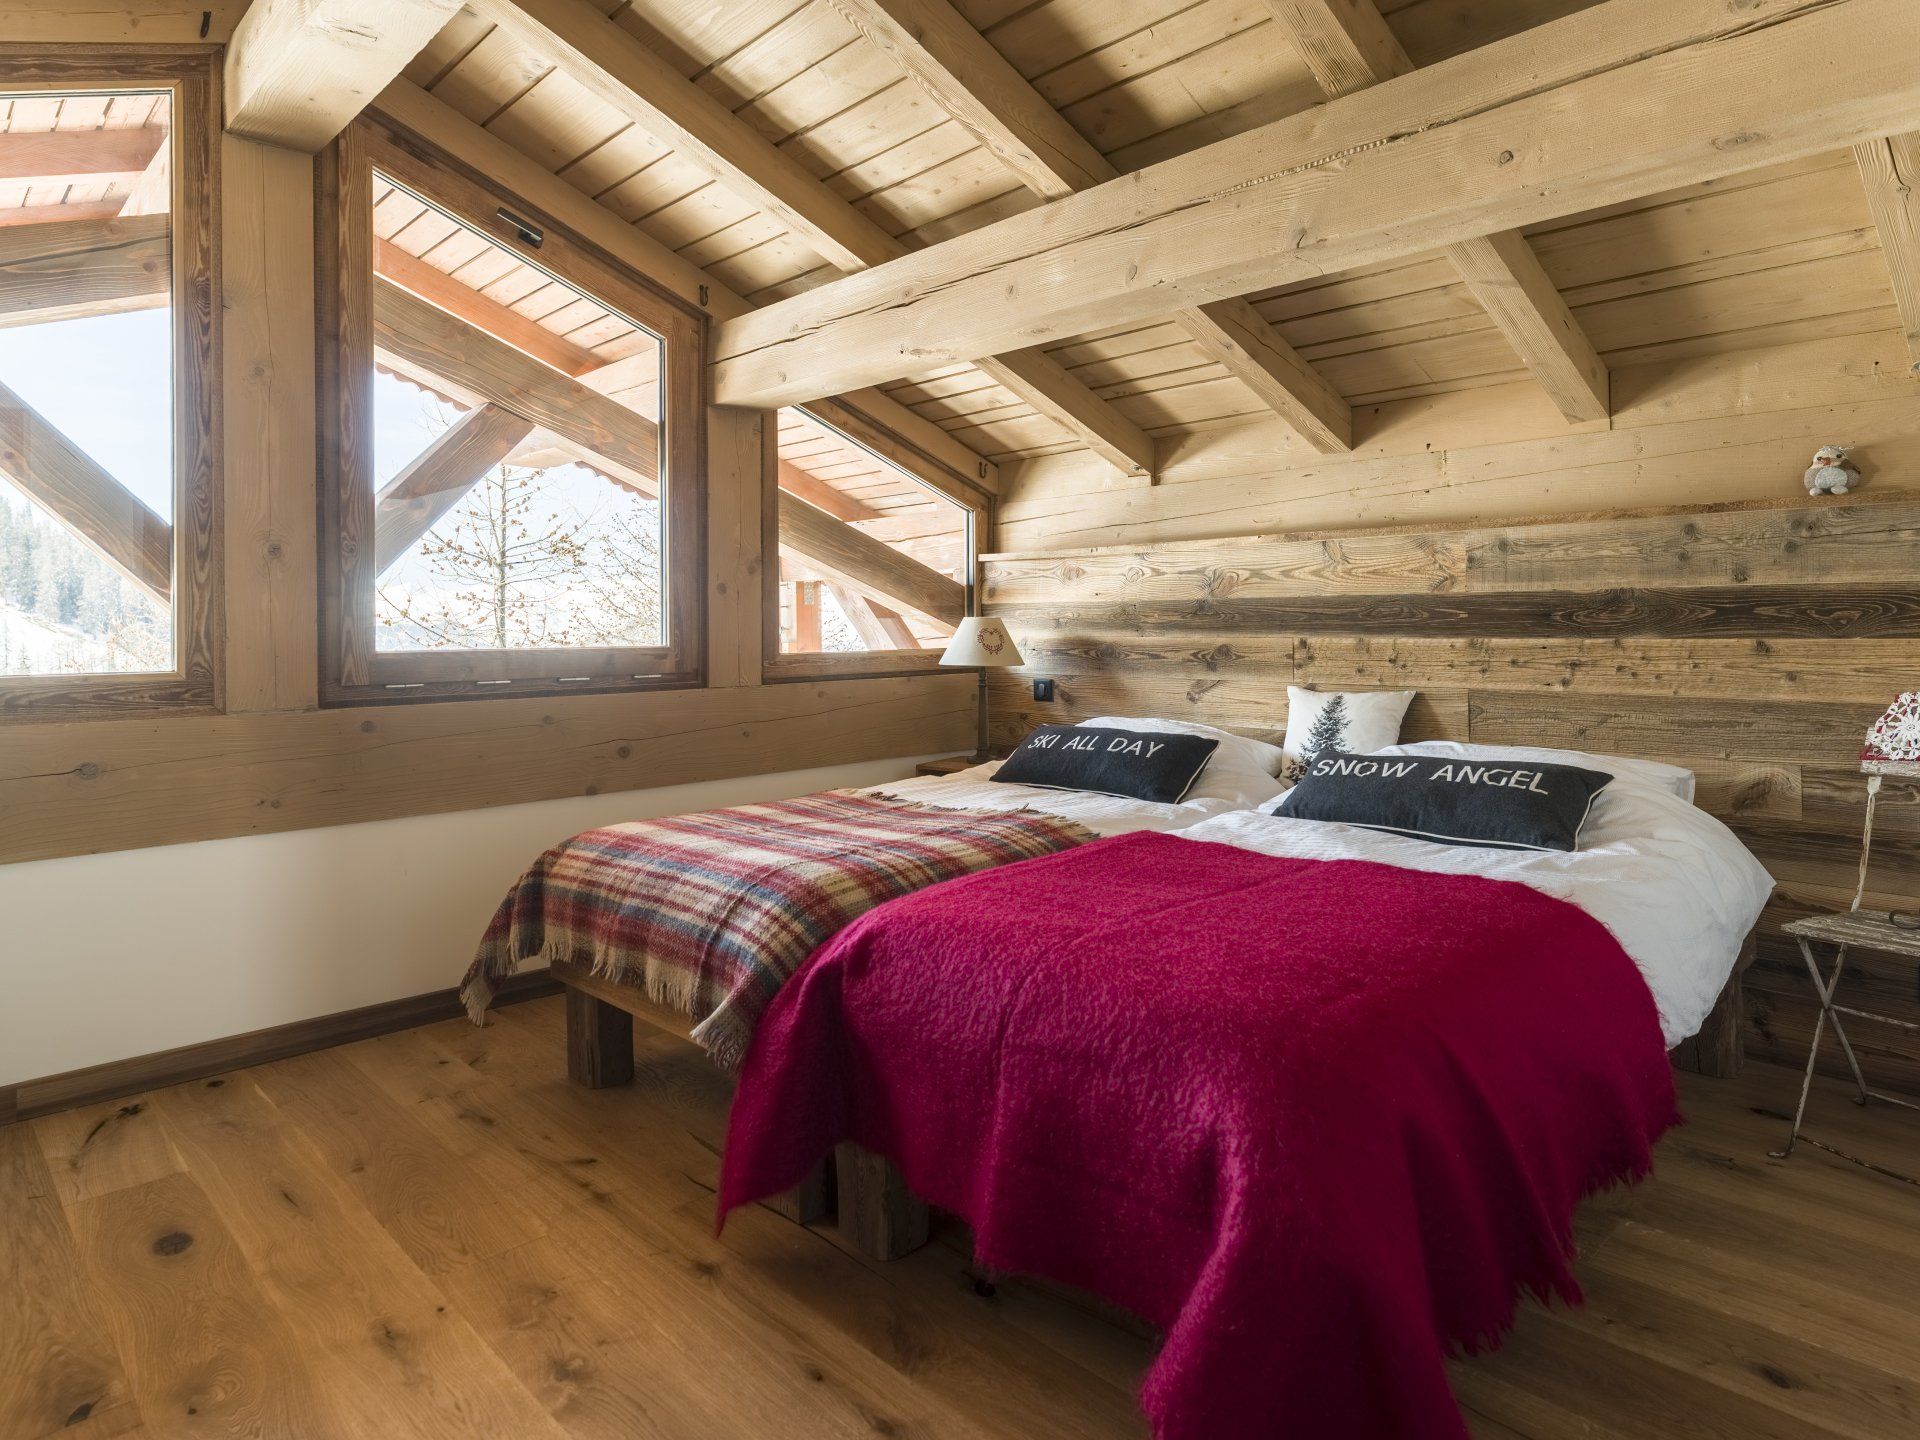 Chalet Marmotte - Bedroom 4 in the Eaves